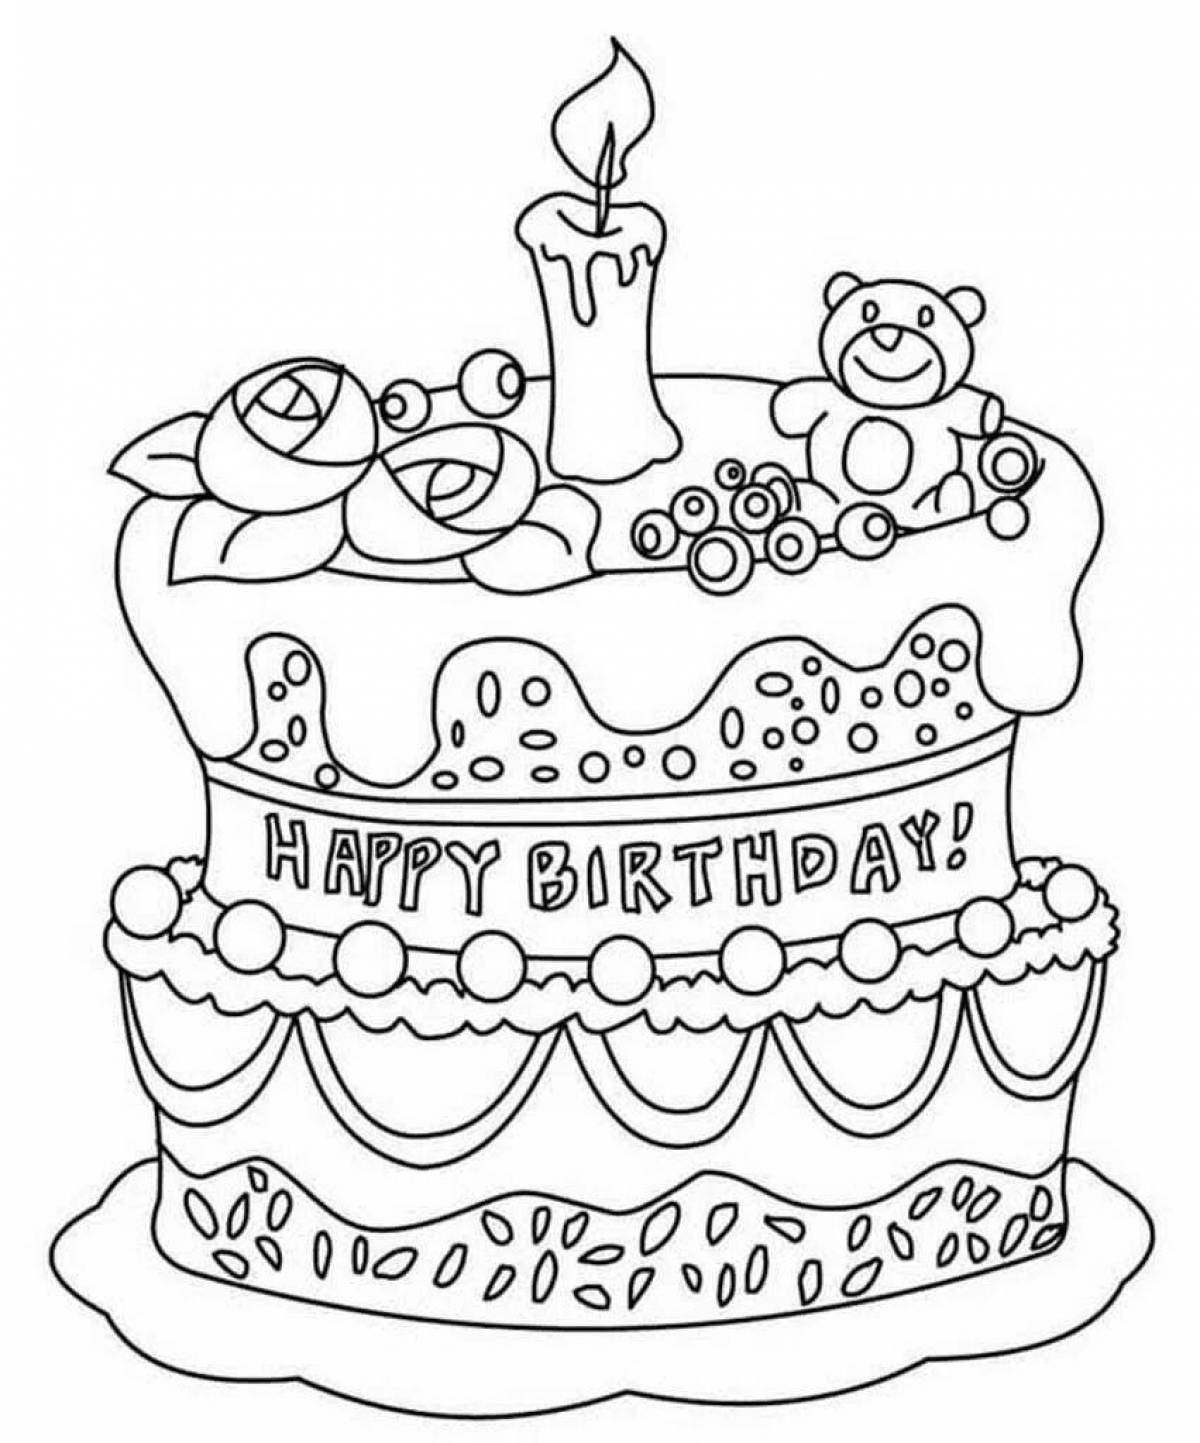 Birthday cake coloring book for 6-7 year olds